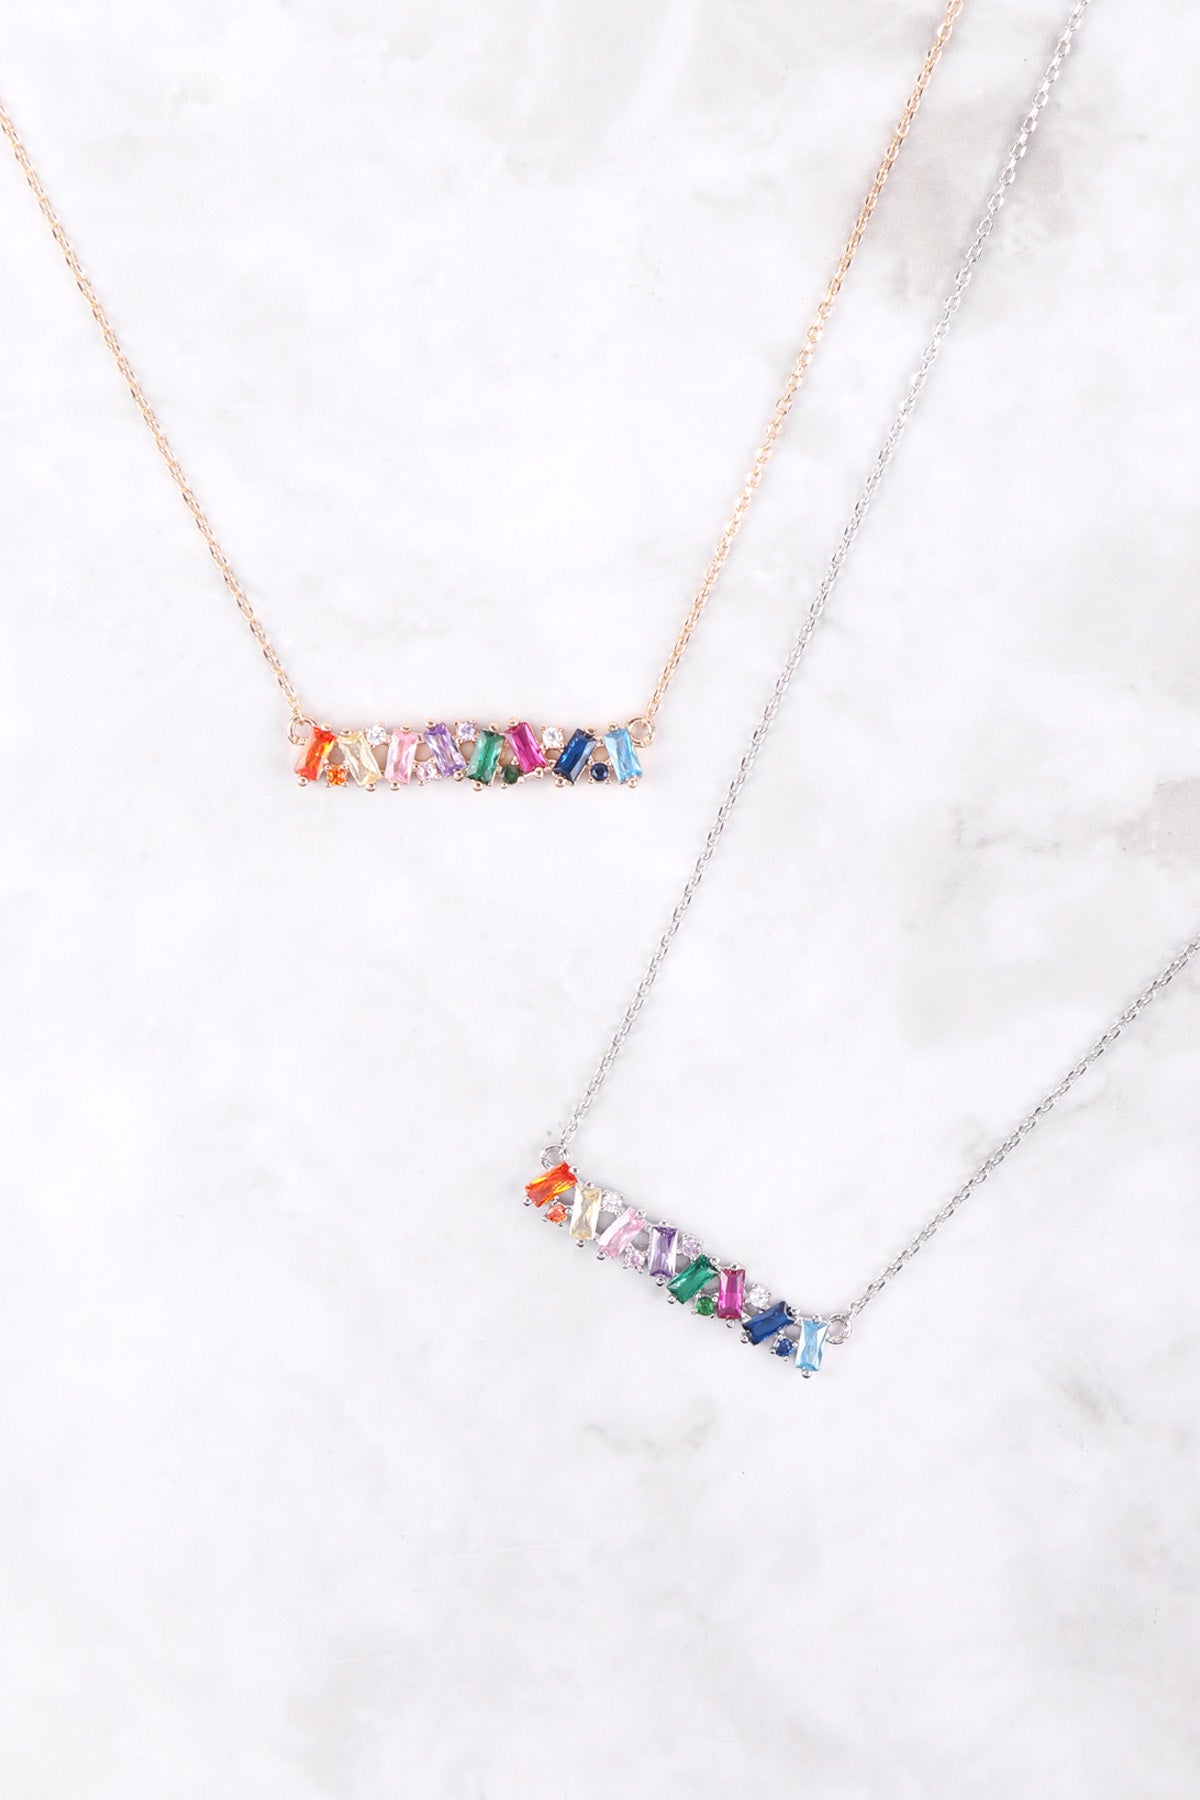 MULTI COLOR CRYSTAL BRASS NECKLACE/6PCS (NOW $3.50 ONLY!)